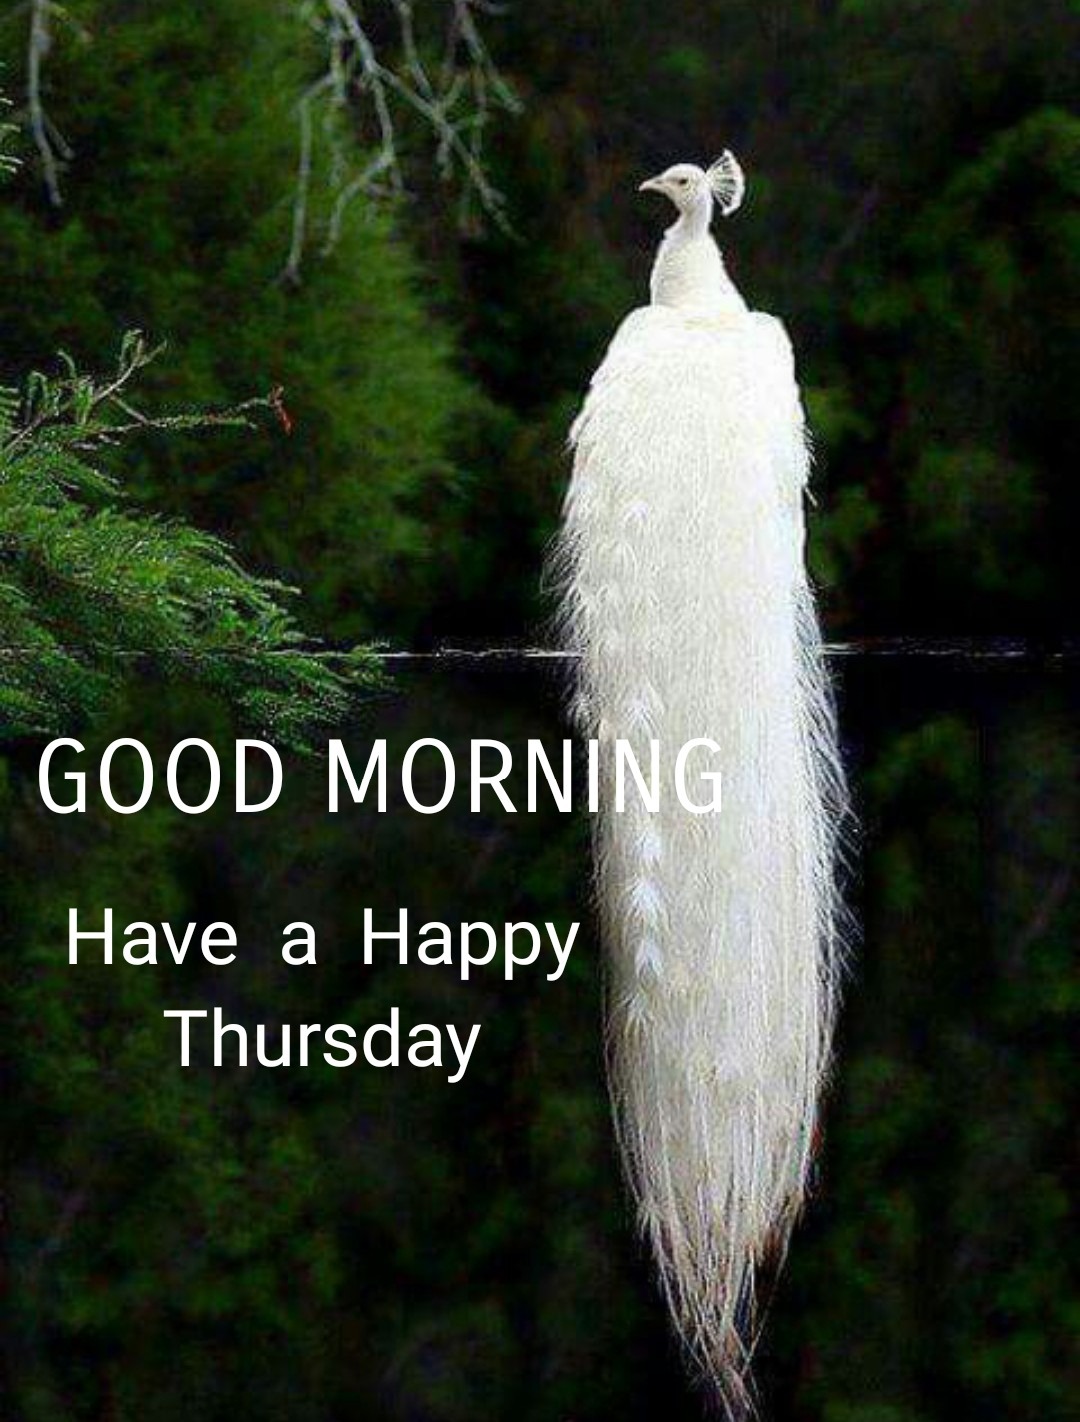 Good Morning Have A Happy Thursday - DesiComments.com